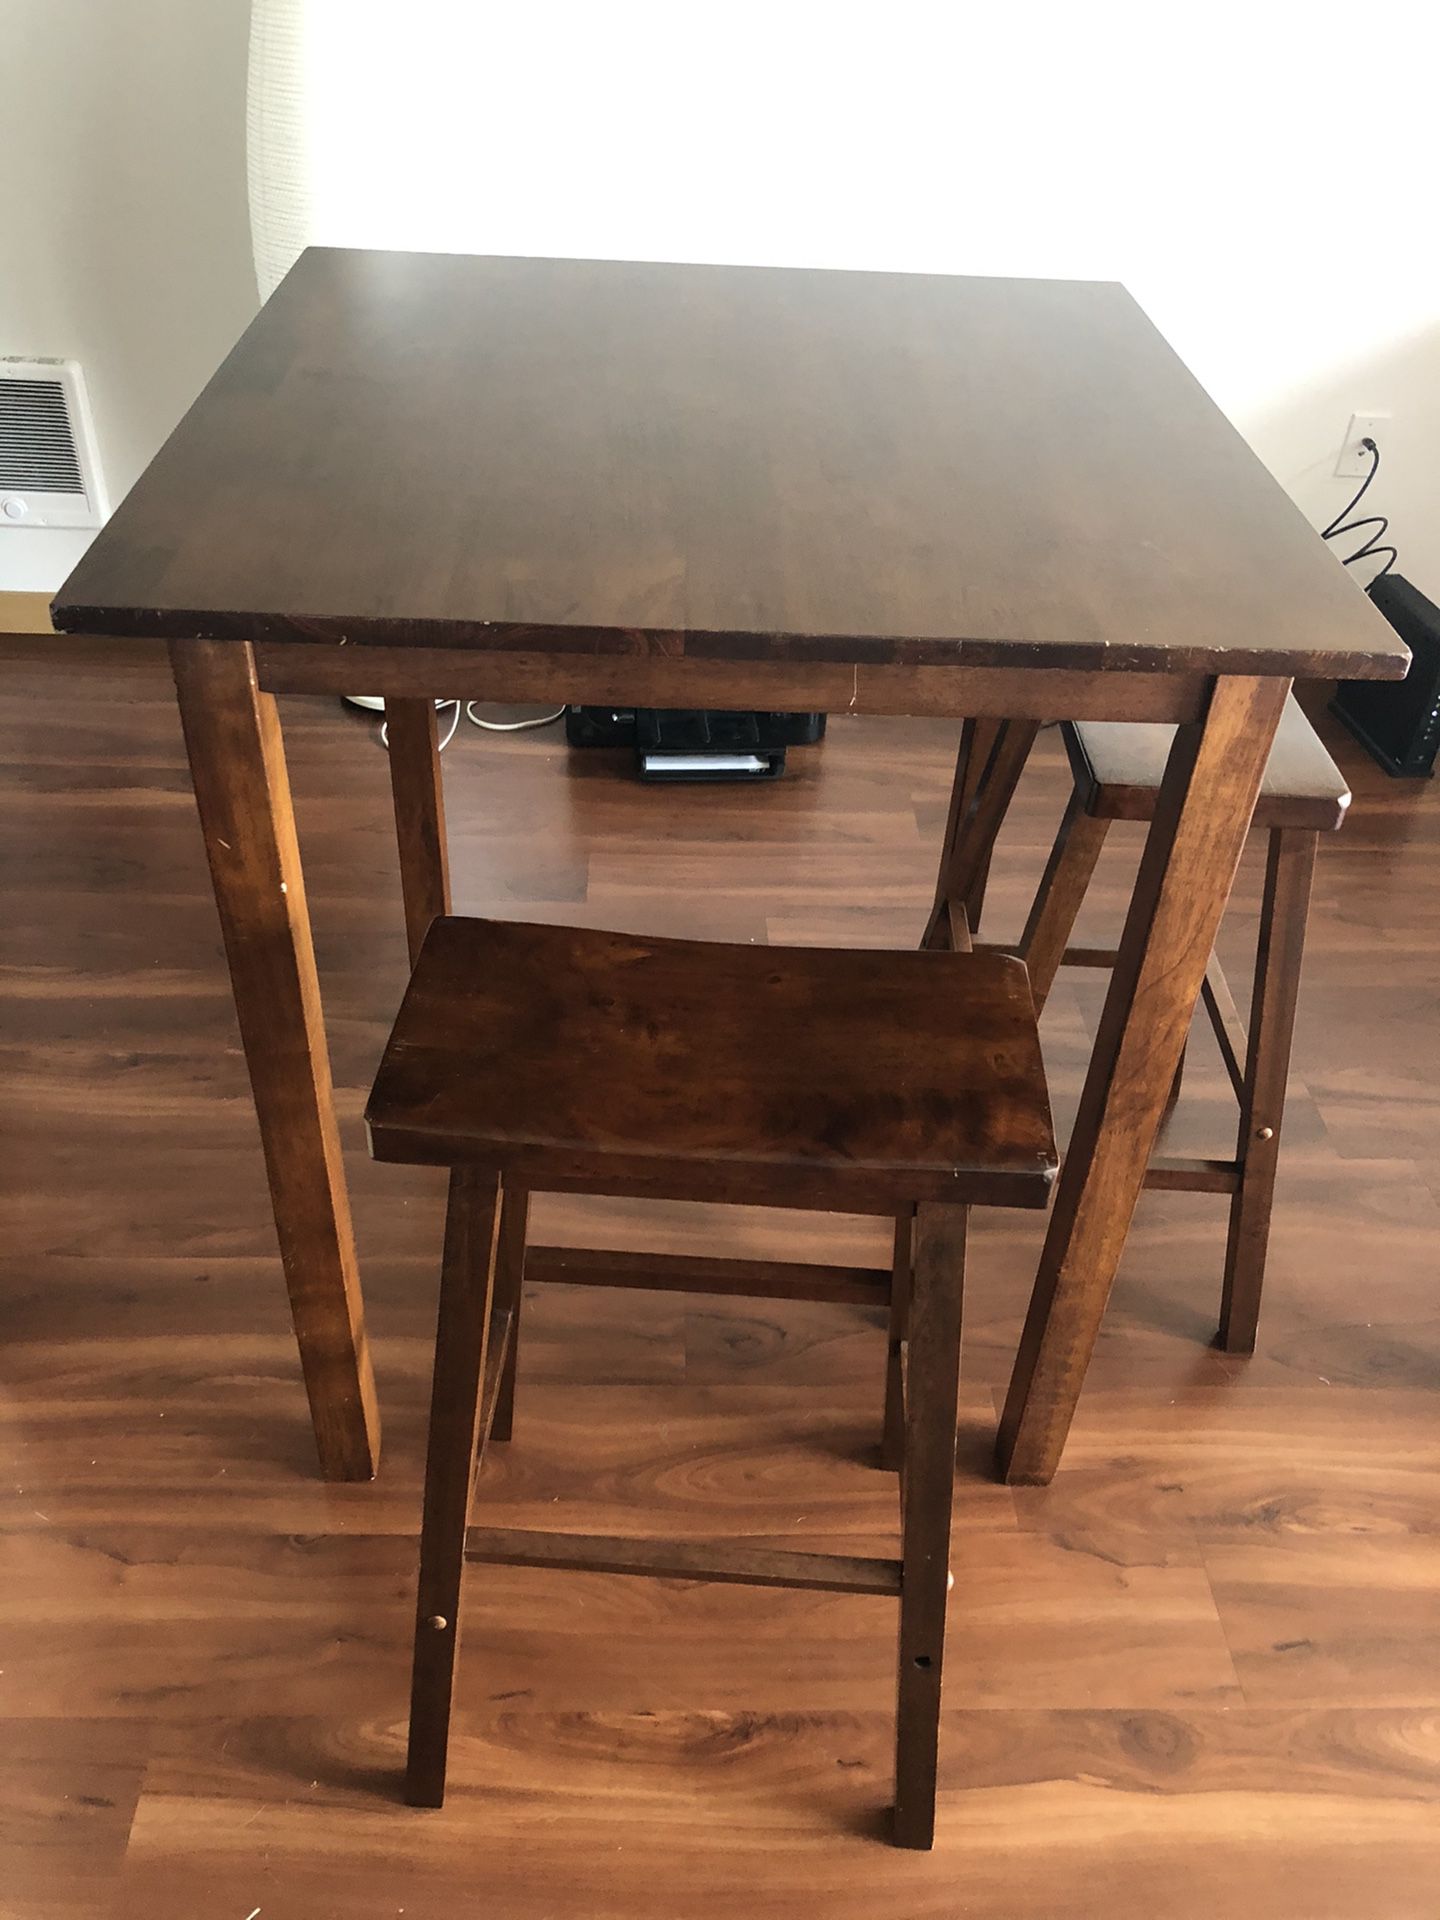 Target 3 piece Parkland High Table with Two saddle seat bar stools- Antique Walnut -Winson